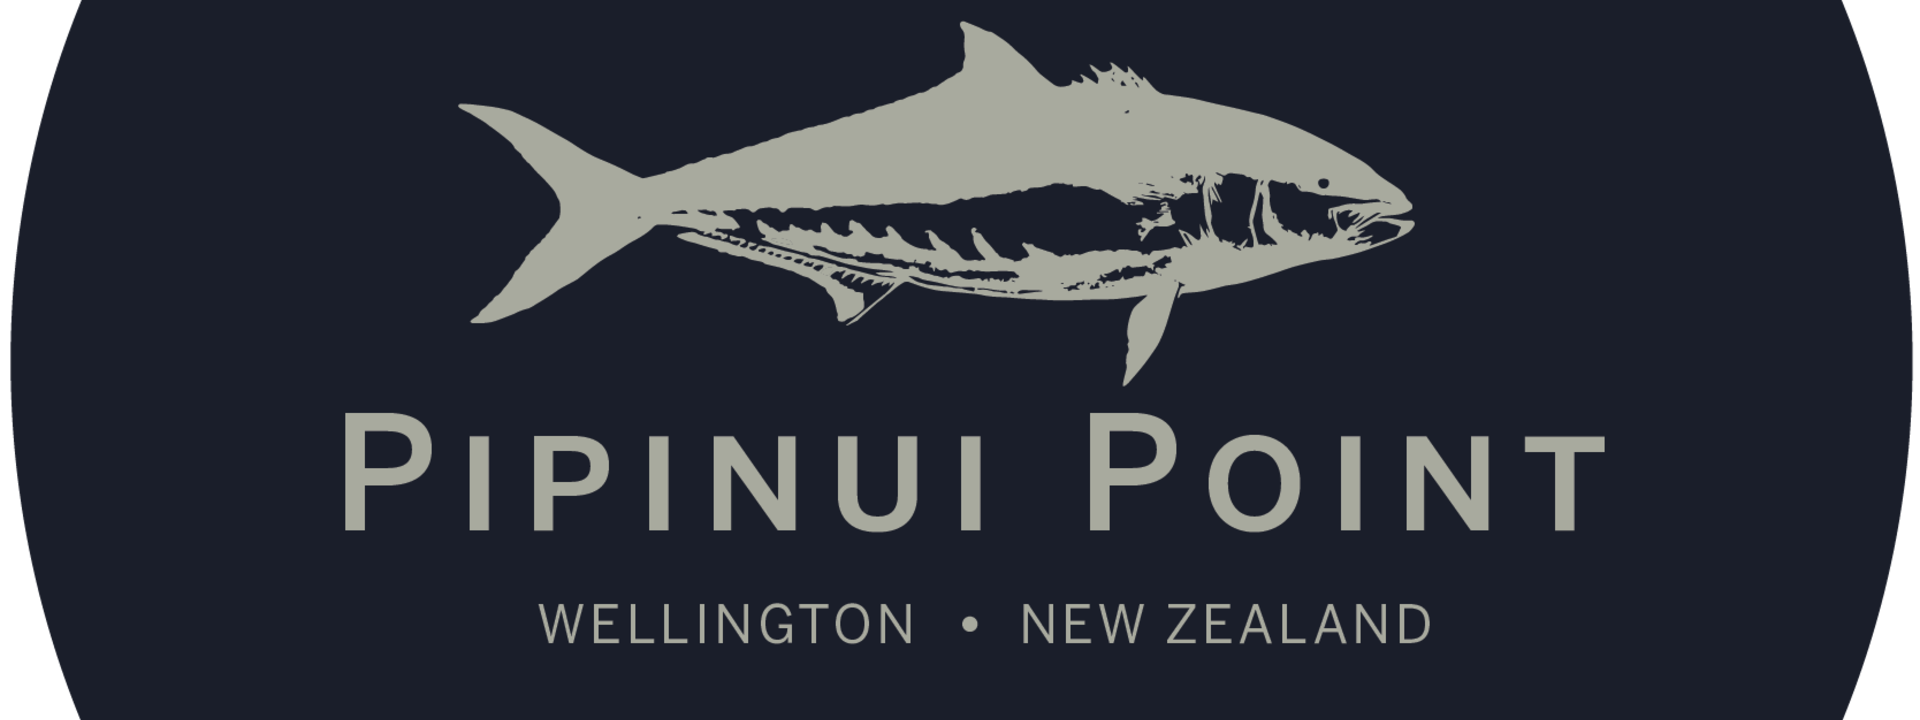 pipinui-point-03_0.png